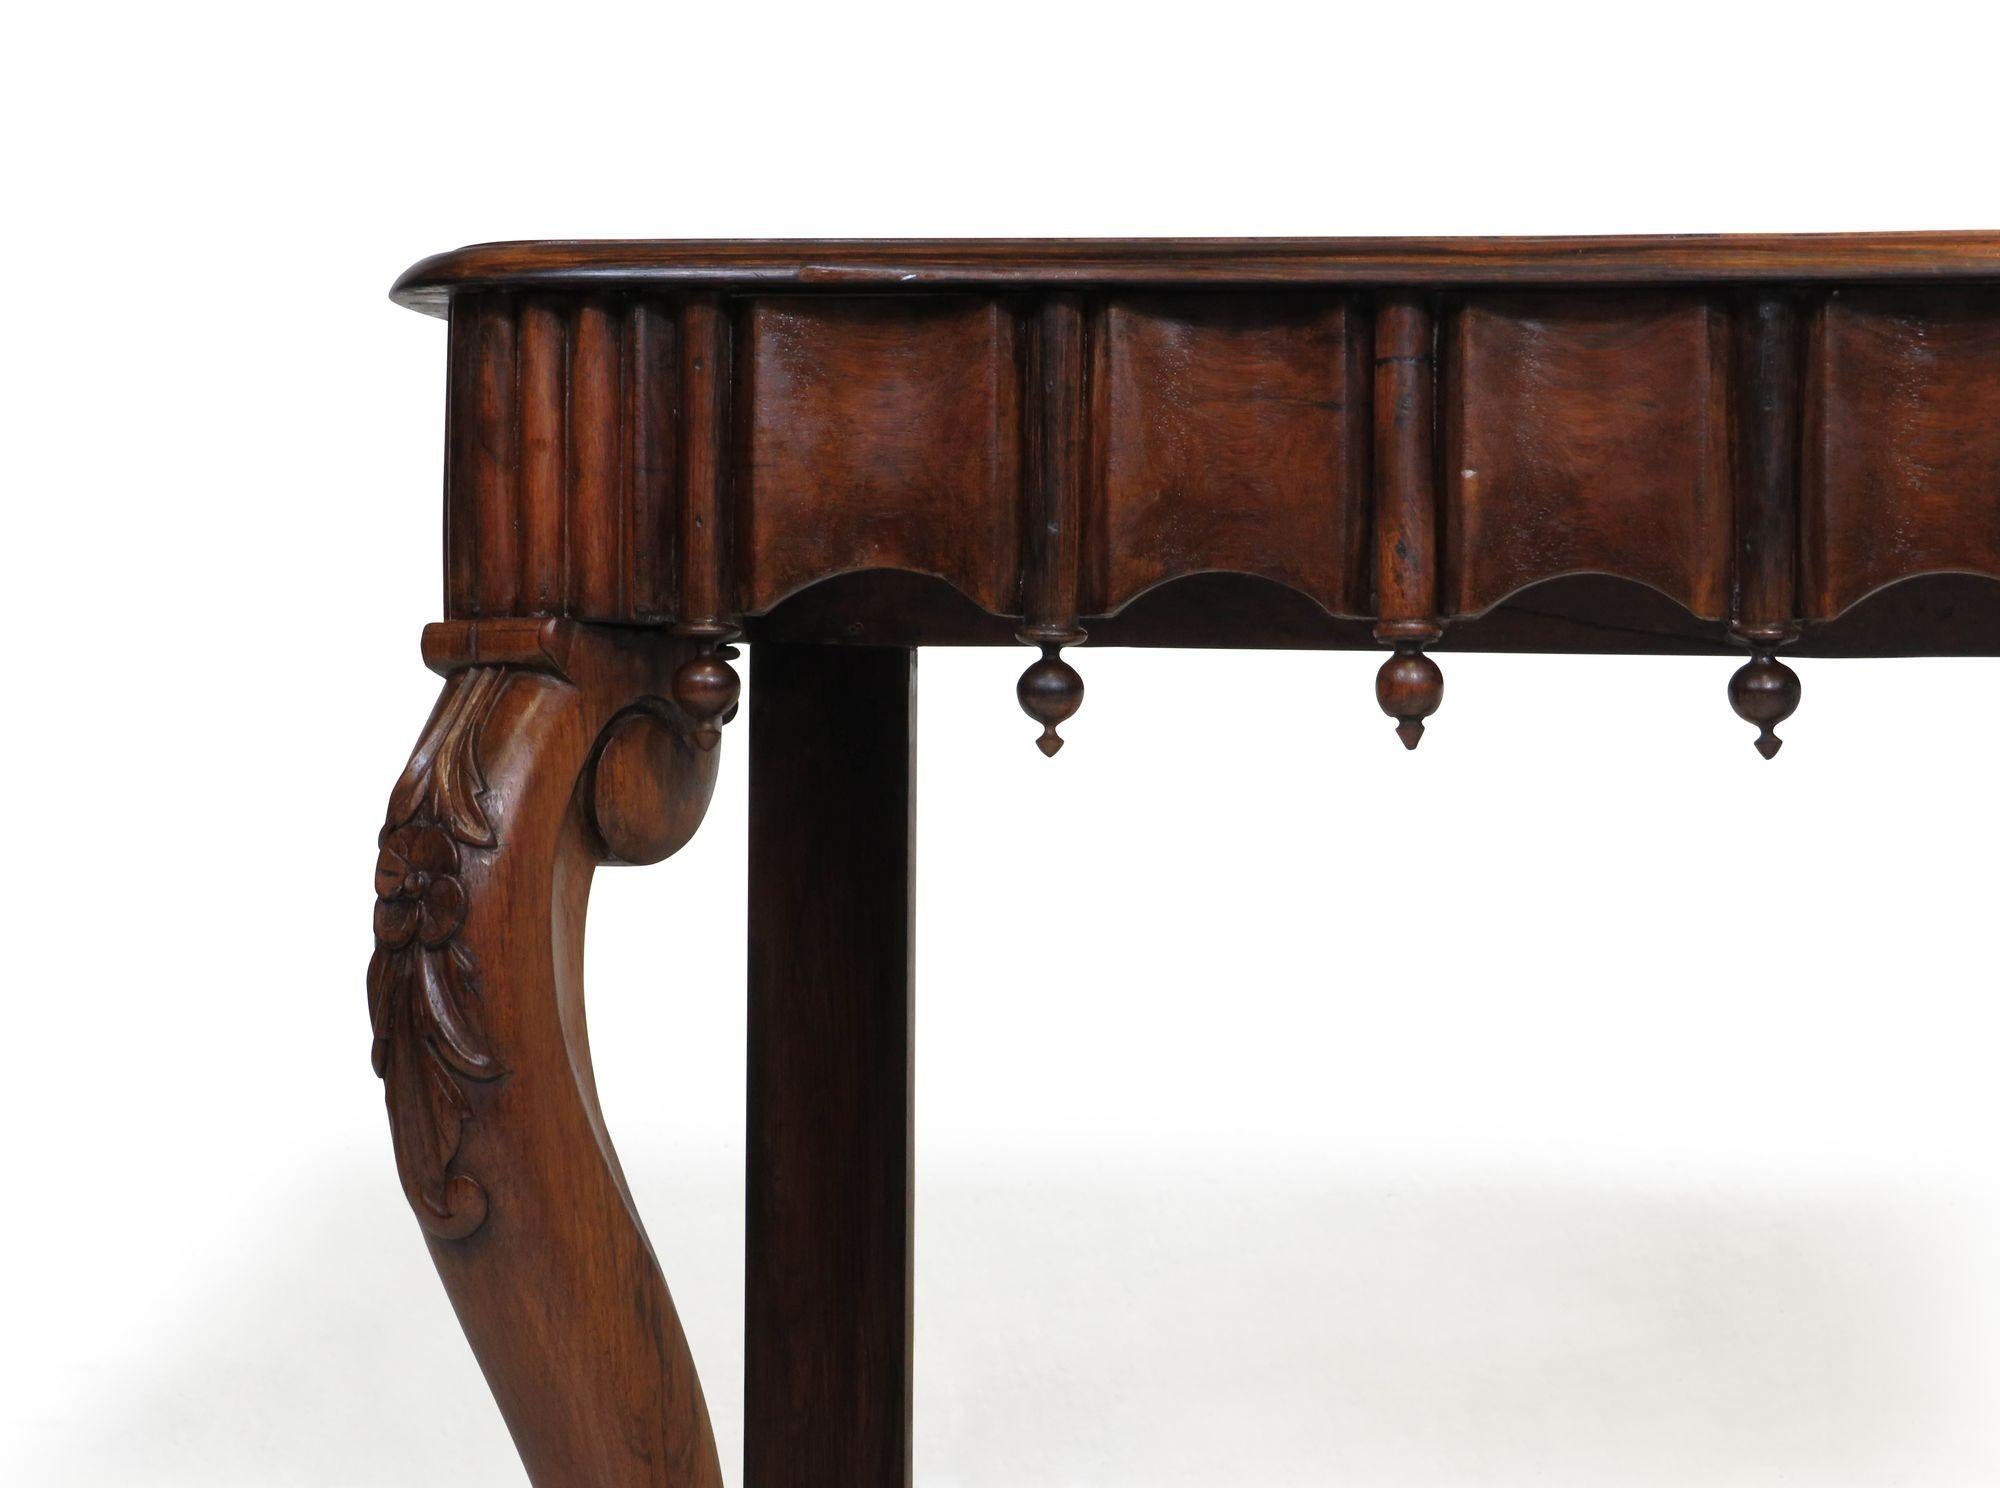 Exquisite 1850's Gothic revival console table handcrafted of richly figured solid Brazilian Rosewood with scalloped edge, decorative carved finials, florets and paw feet. 
 
W 55.50 x D 22 x 34.50 
Top surface depth 20.75